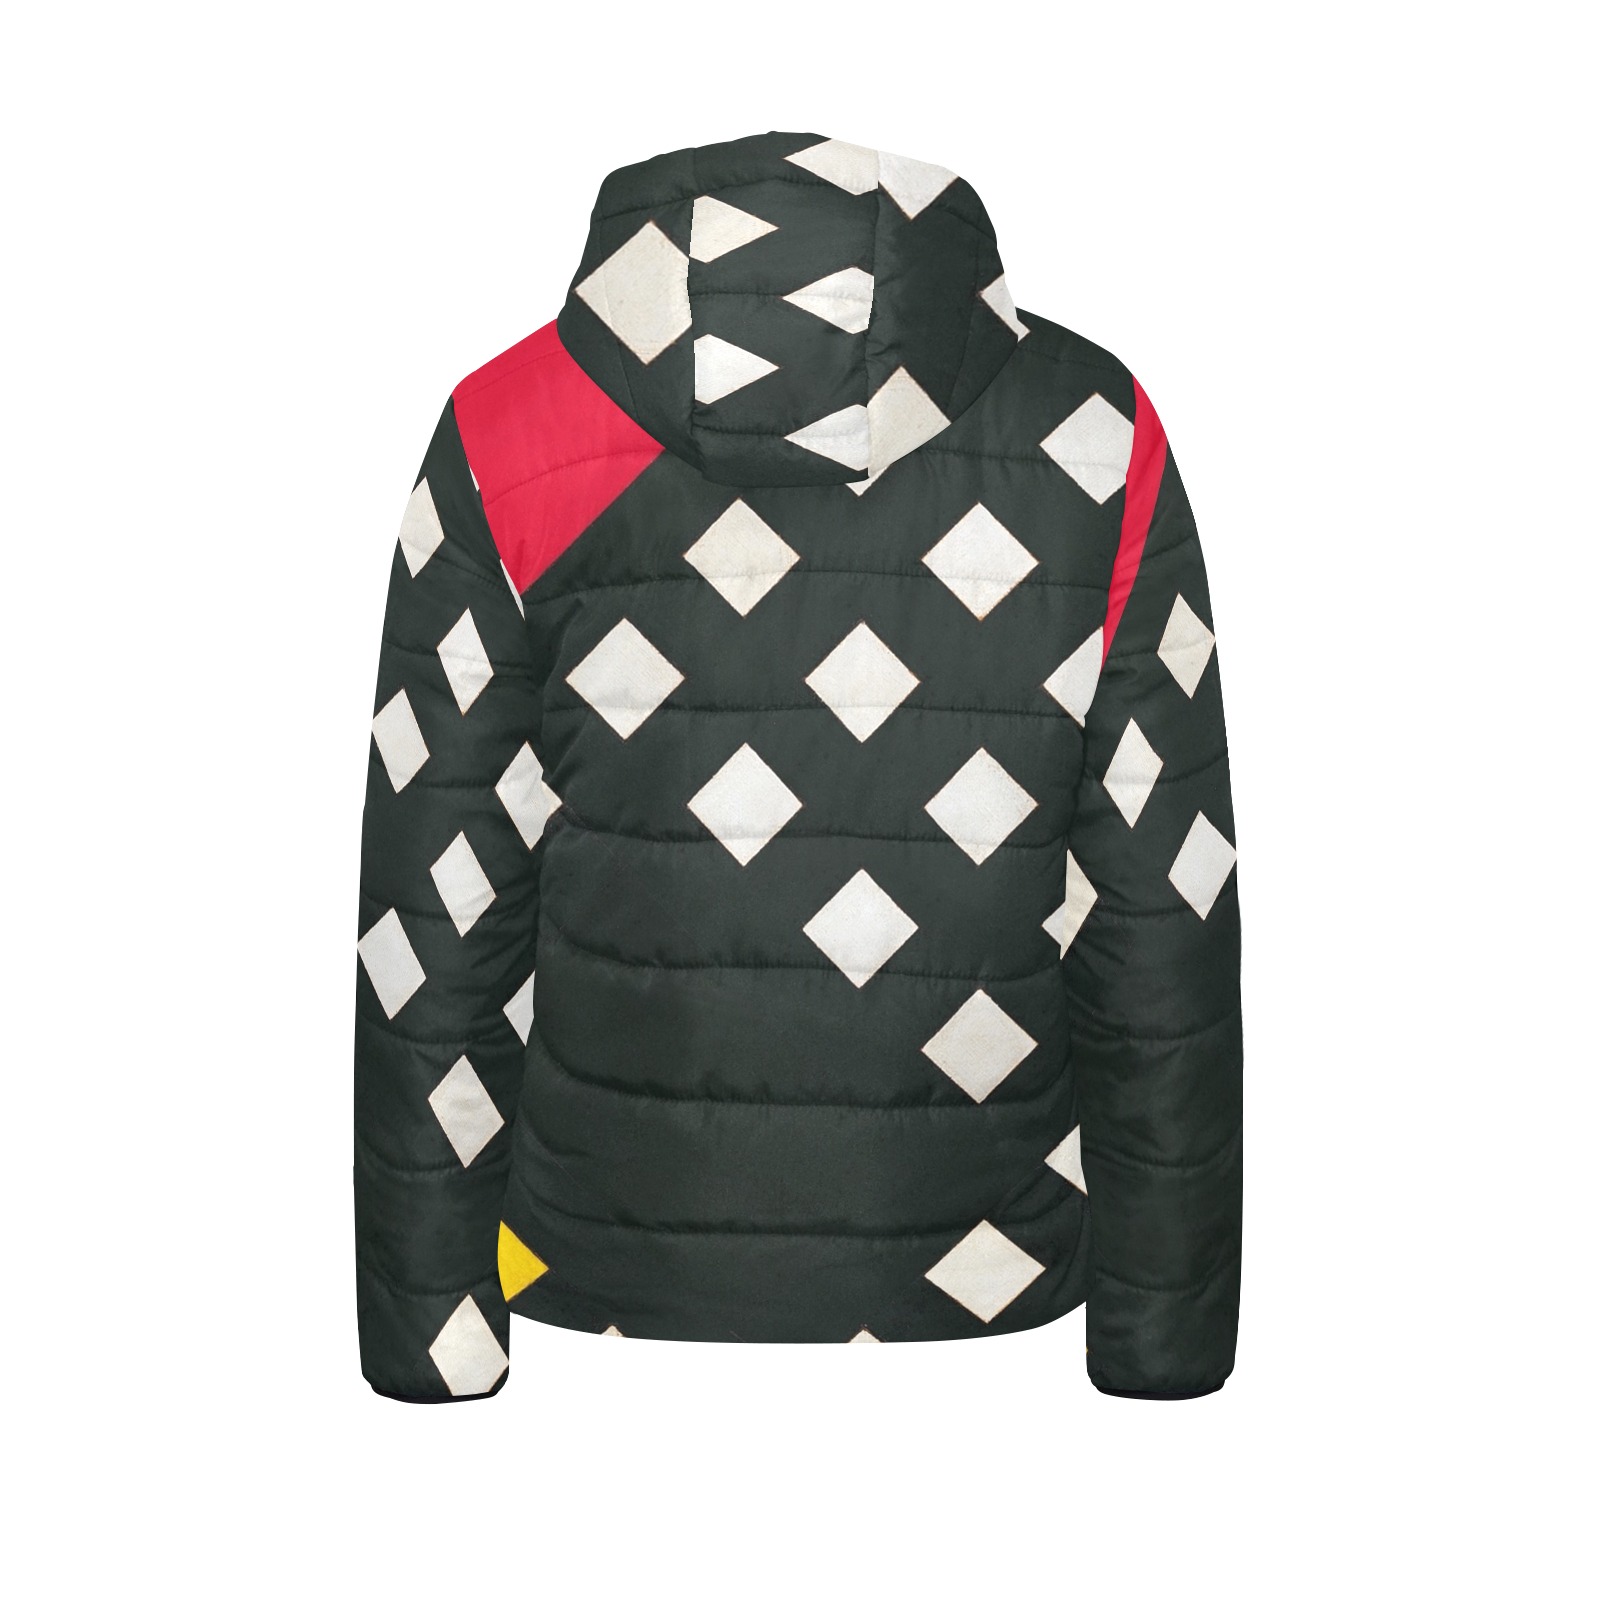 Counter-composition XV by Theo van Doesburg- Kids' Padded Hooded Jacket (Model H45)